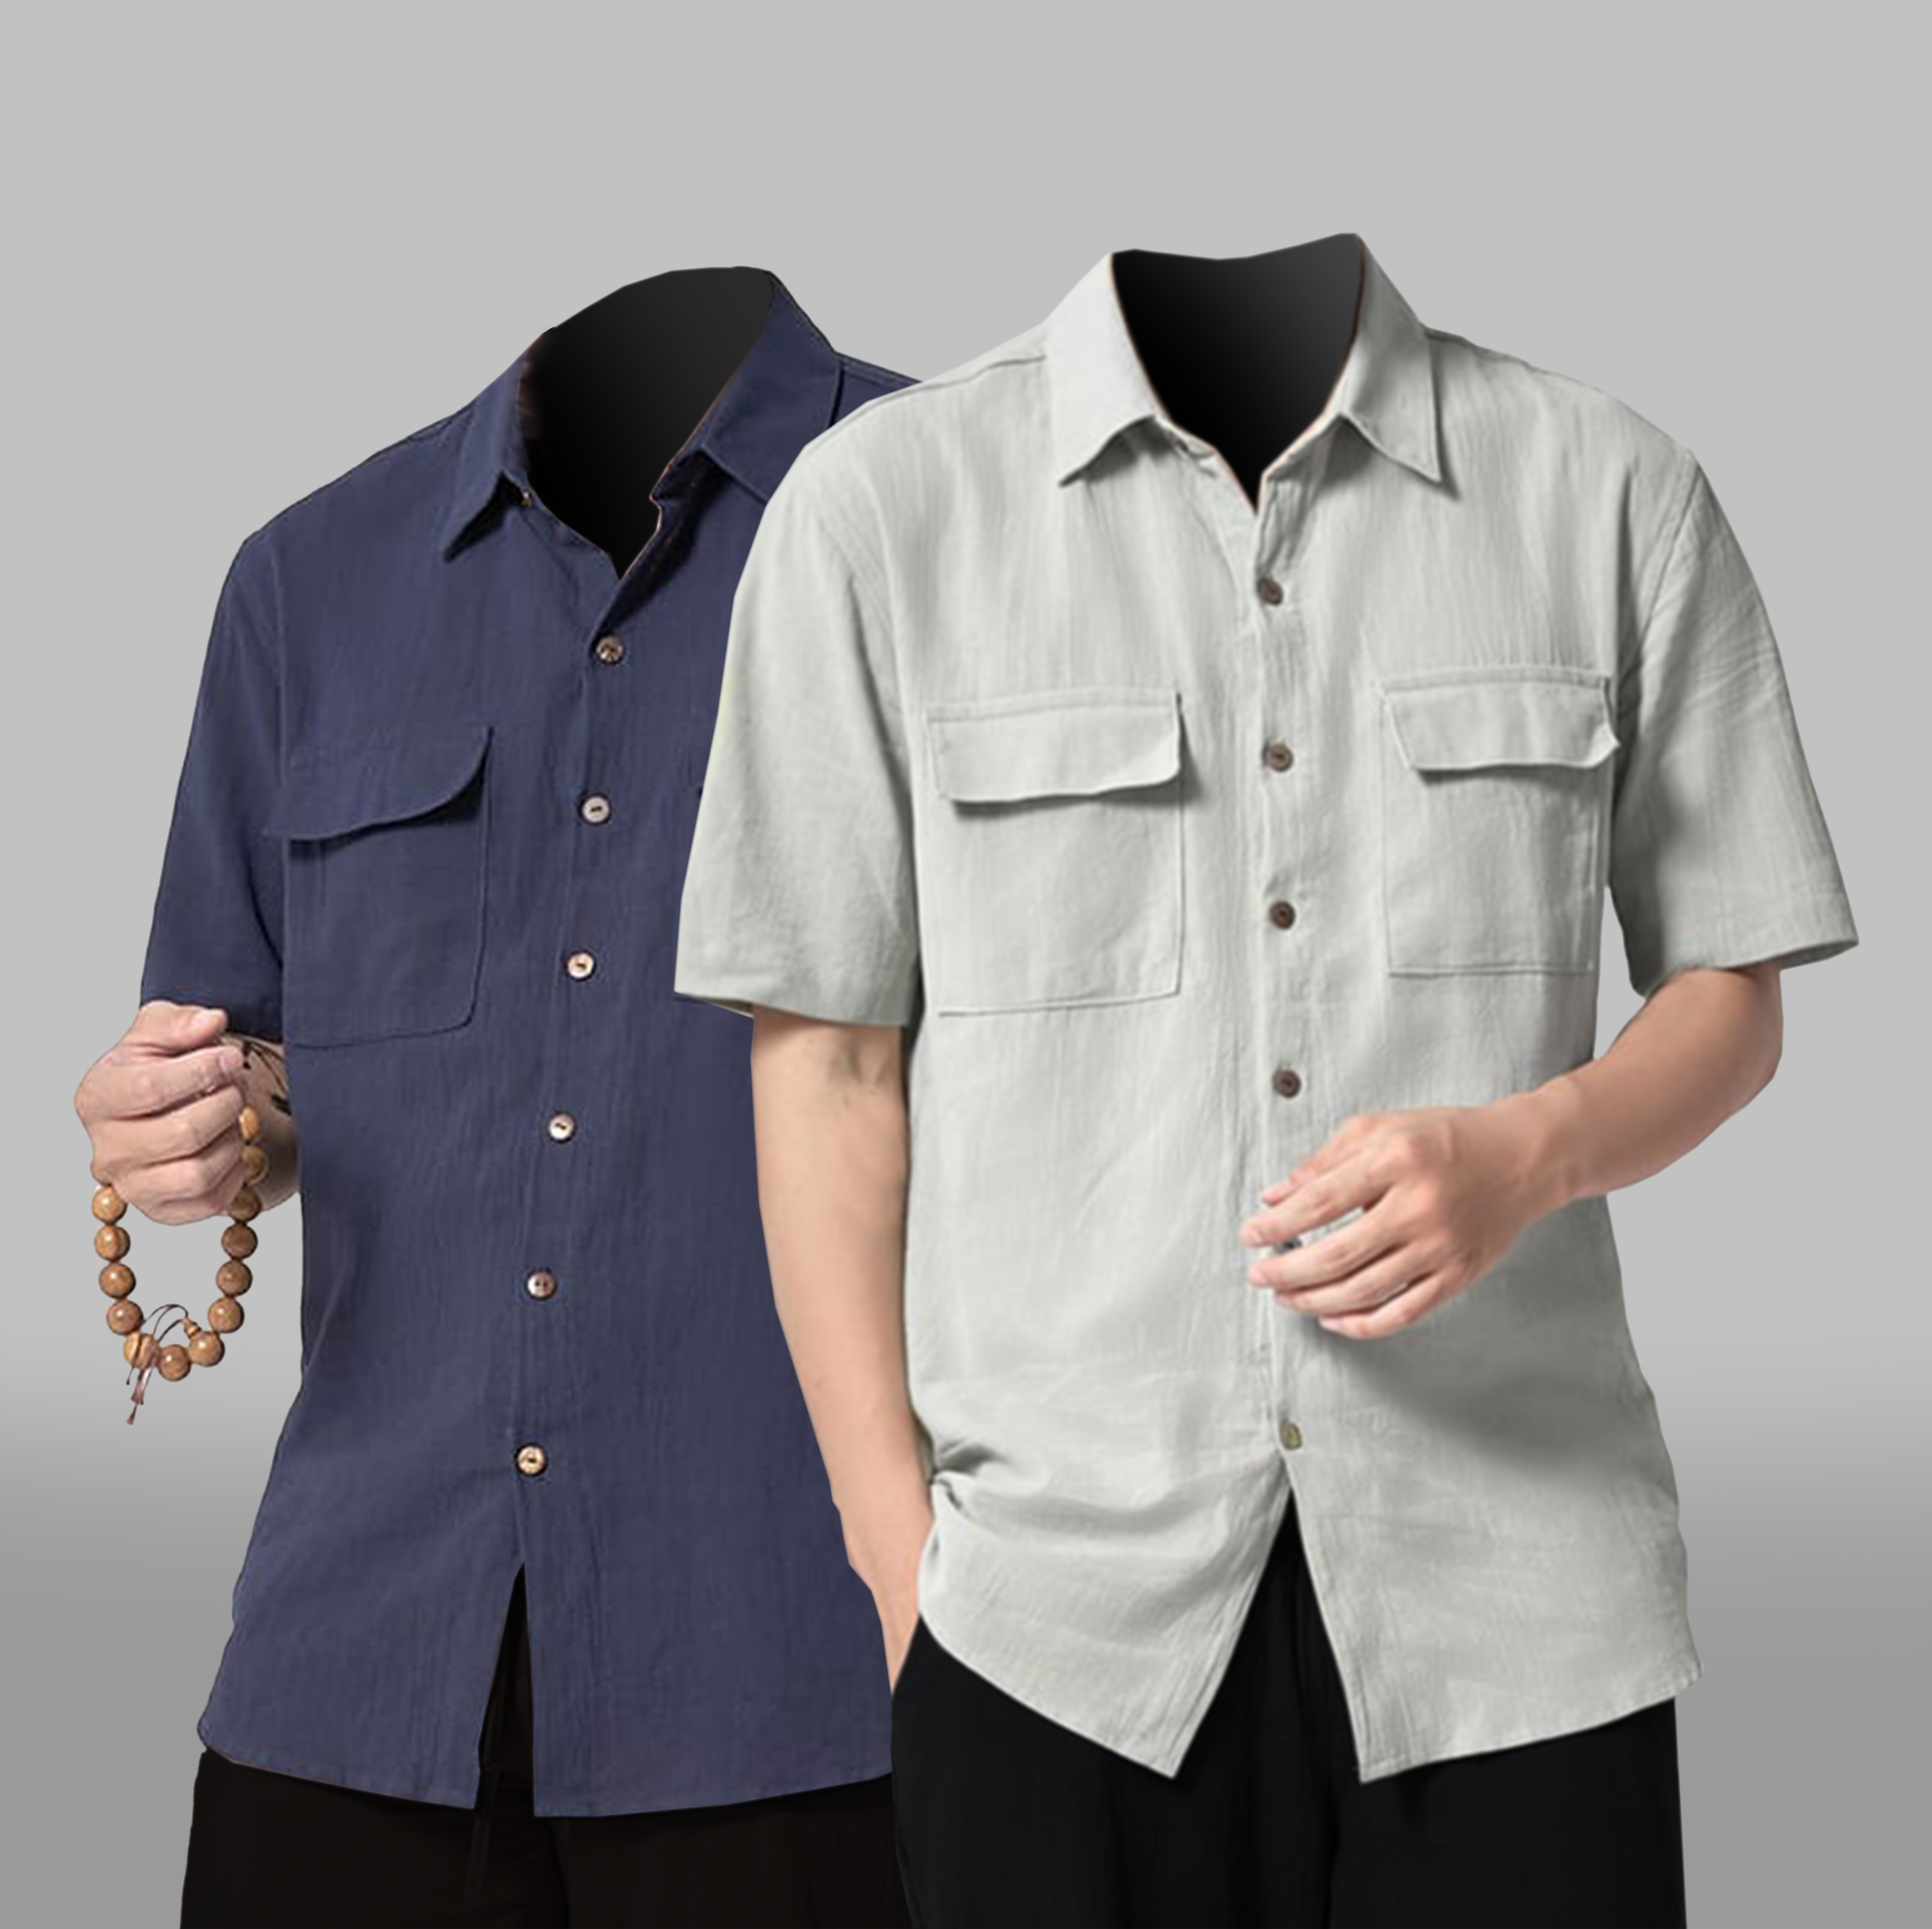 Men's short-sleeved shirt with two chest pockets - A6LHFA